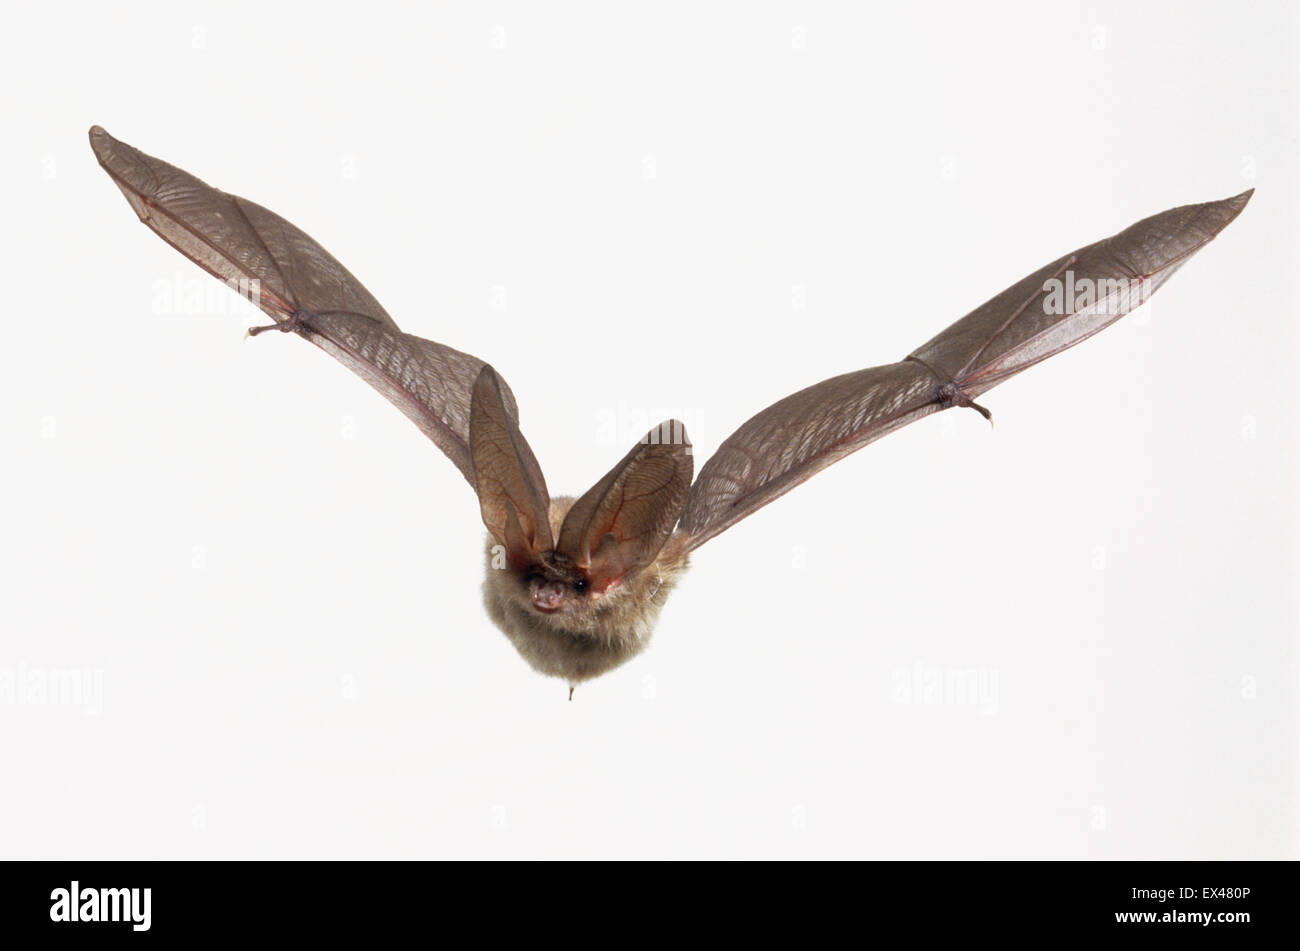 Big-eared Bat (Chiroptera) flying, front view Stock Photo